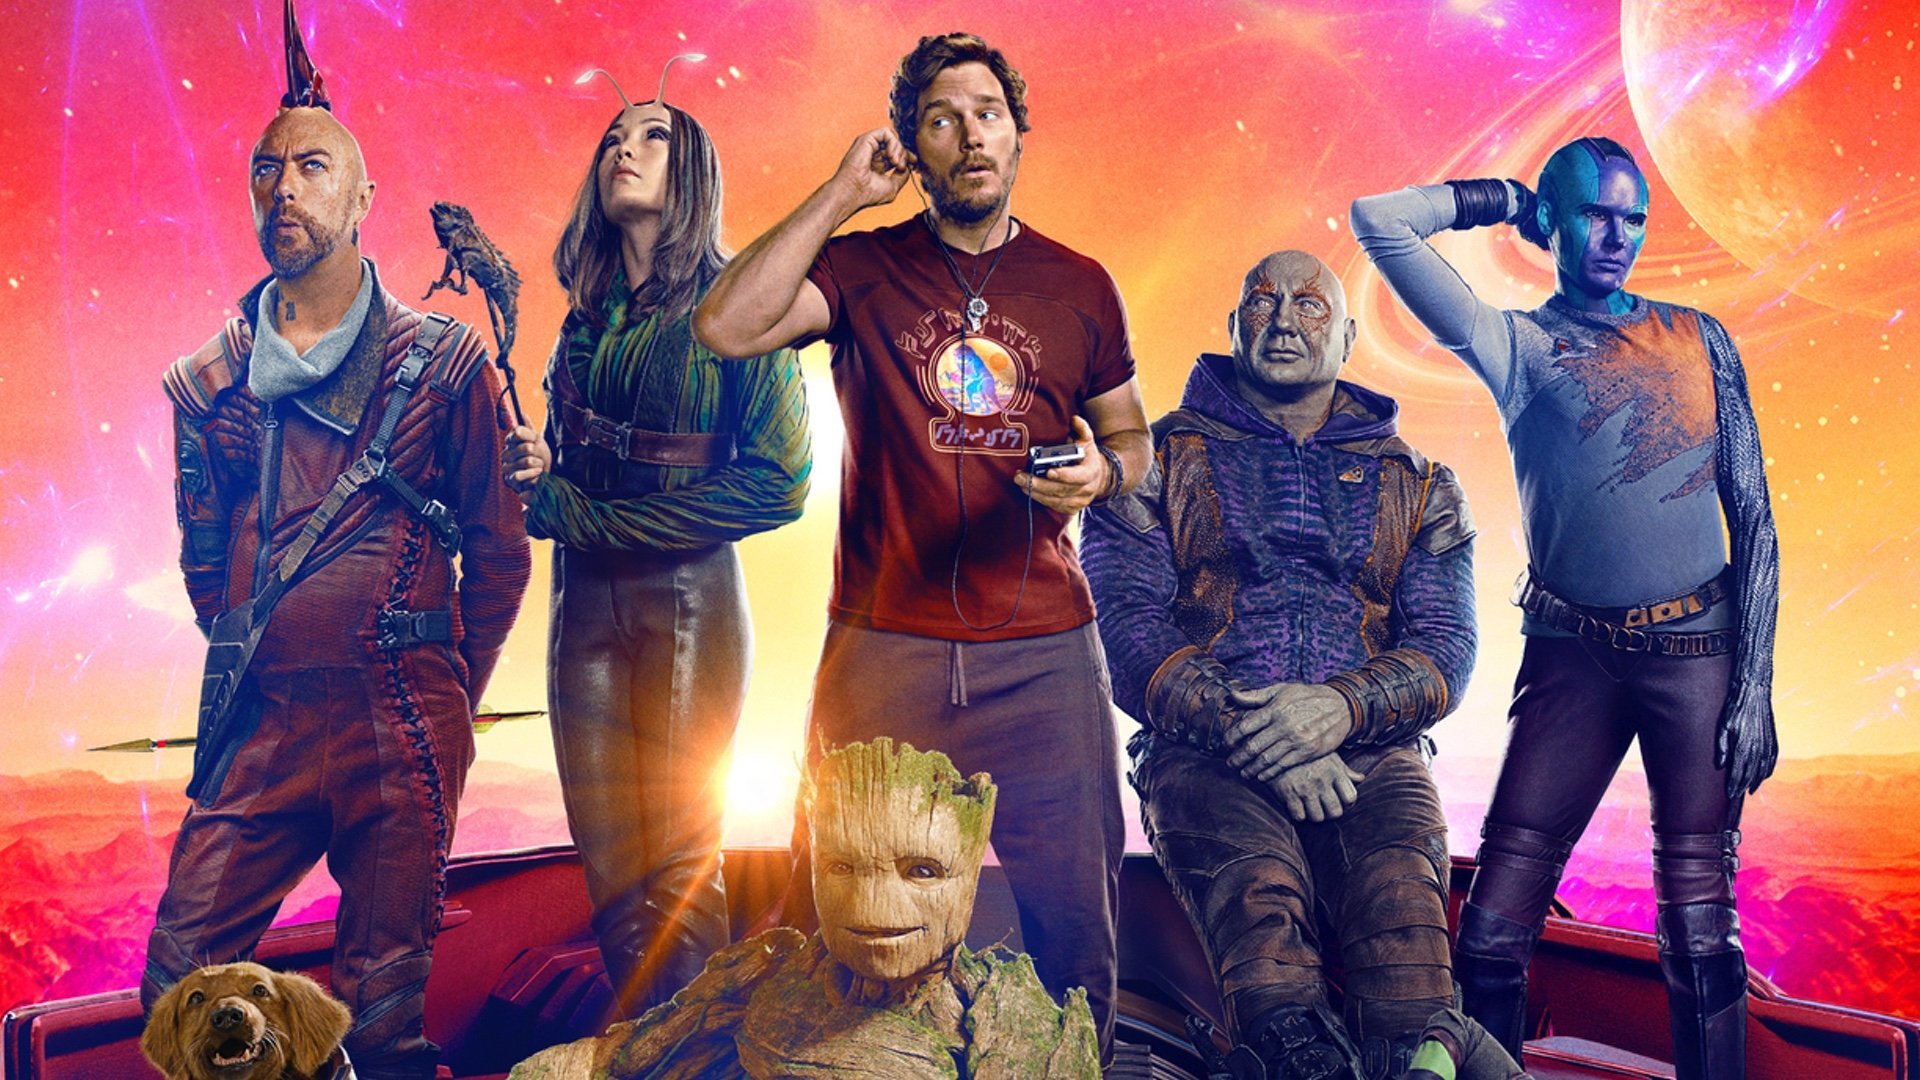 James Gunn reveals the ‘secret person responsible’ for the Guardians of the Galaxy movies